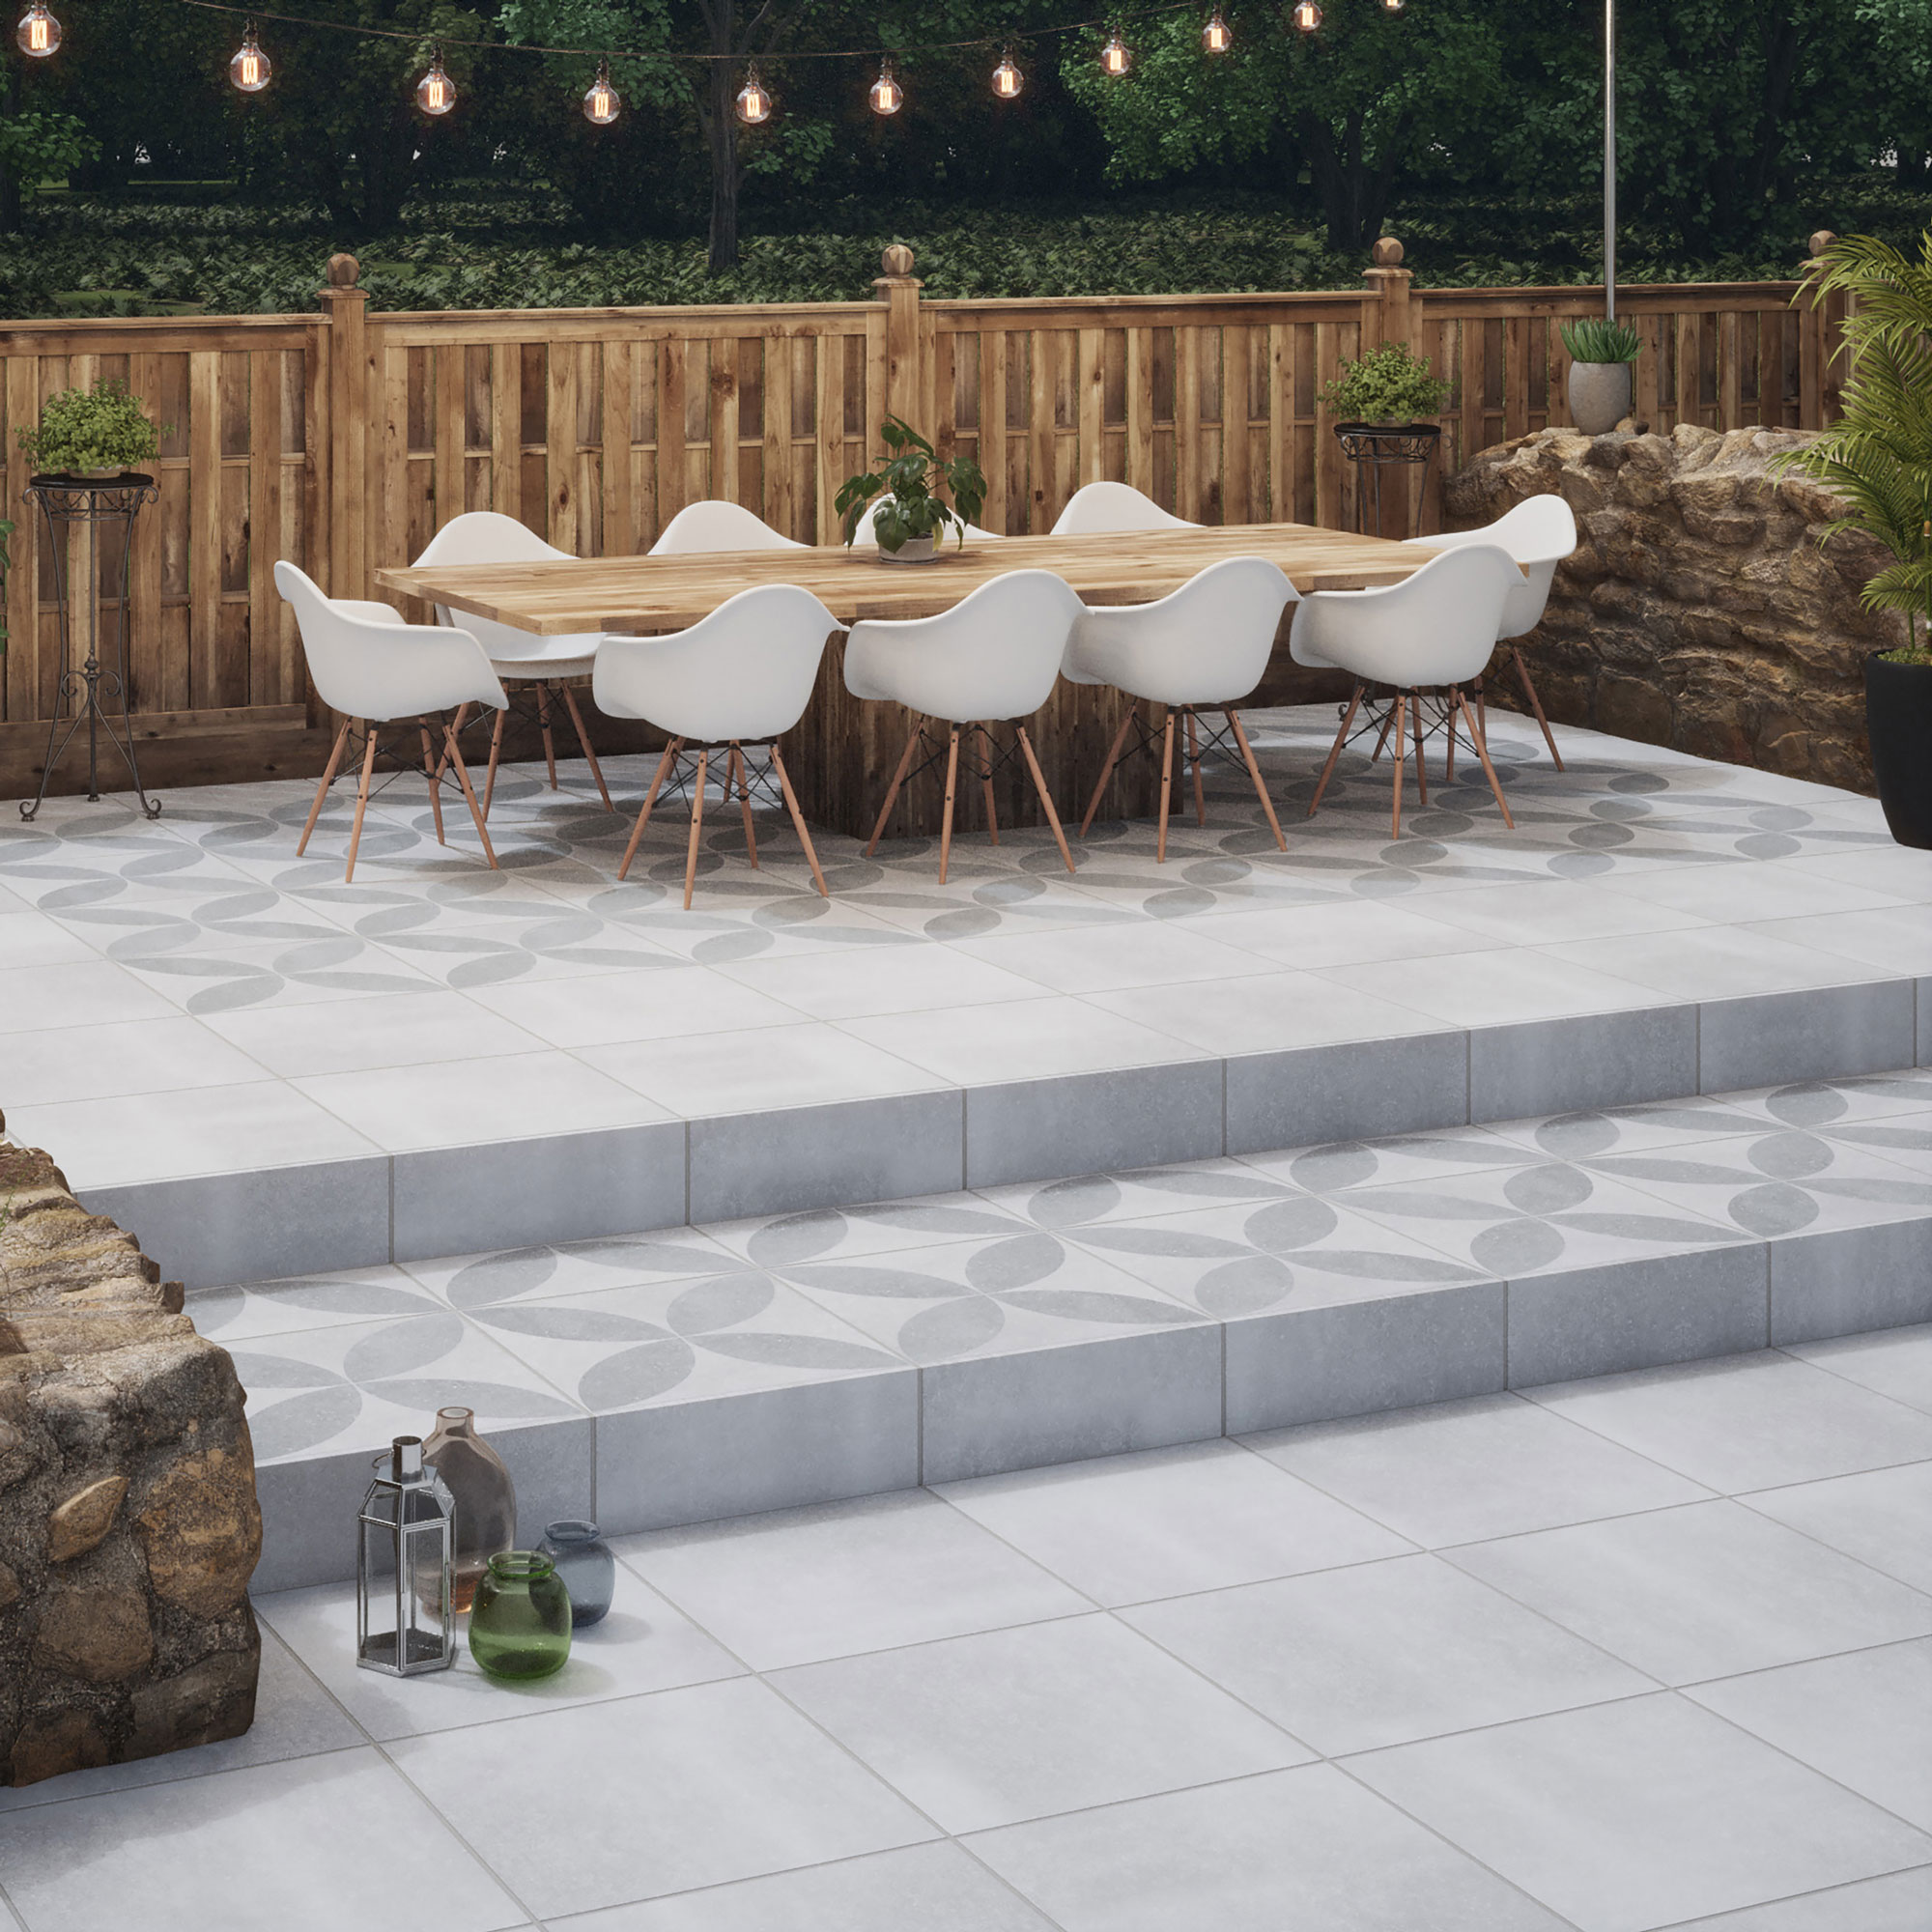 10 Patio Paving Ideas To Make The Most Of Your Outdoor Space | Ideal Home